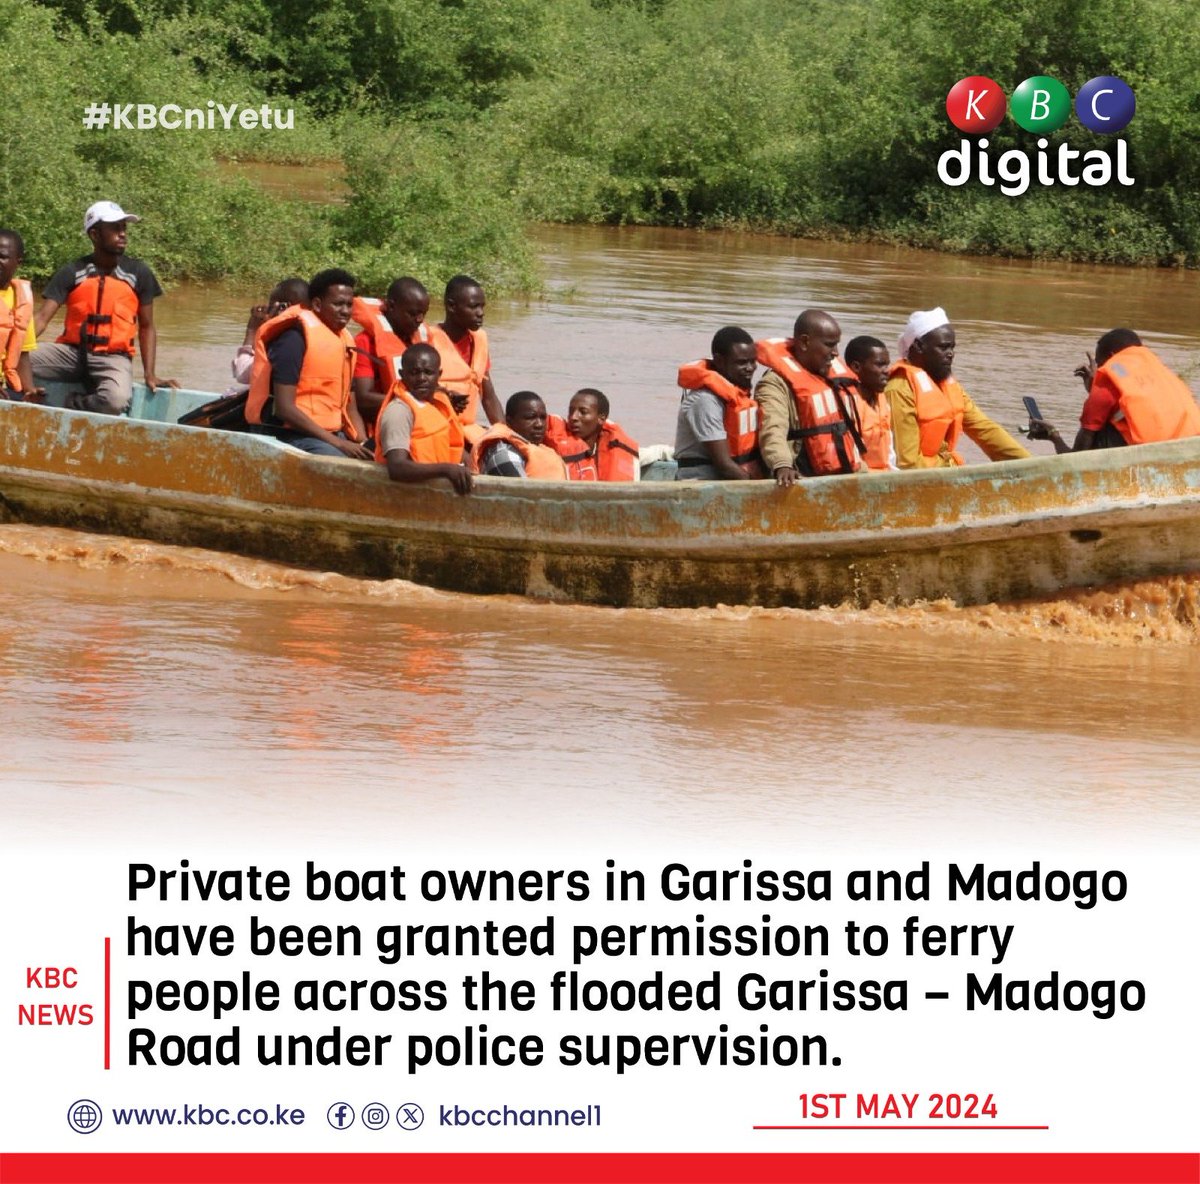 Private boat owners in Garissa and Madogo have been granted permission to ferry people across the flooded Garissa – Madogo Road under police supervision.
#KBCniYetu ^RO